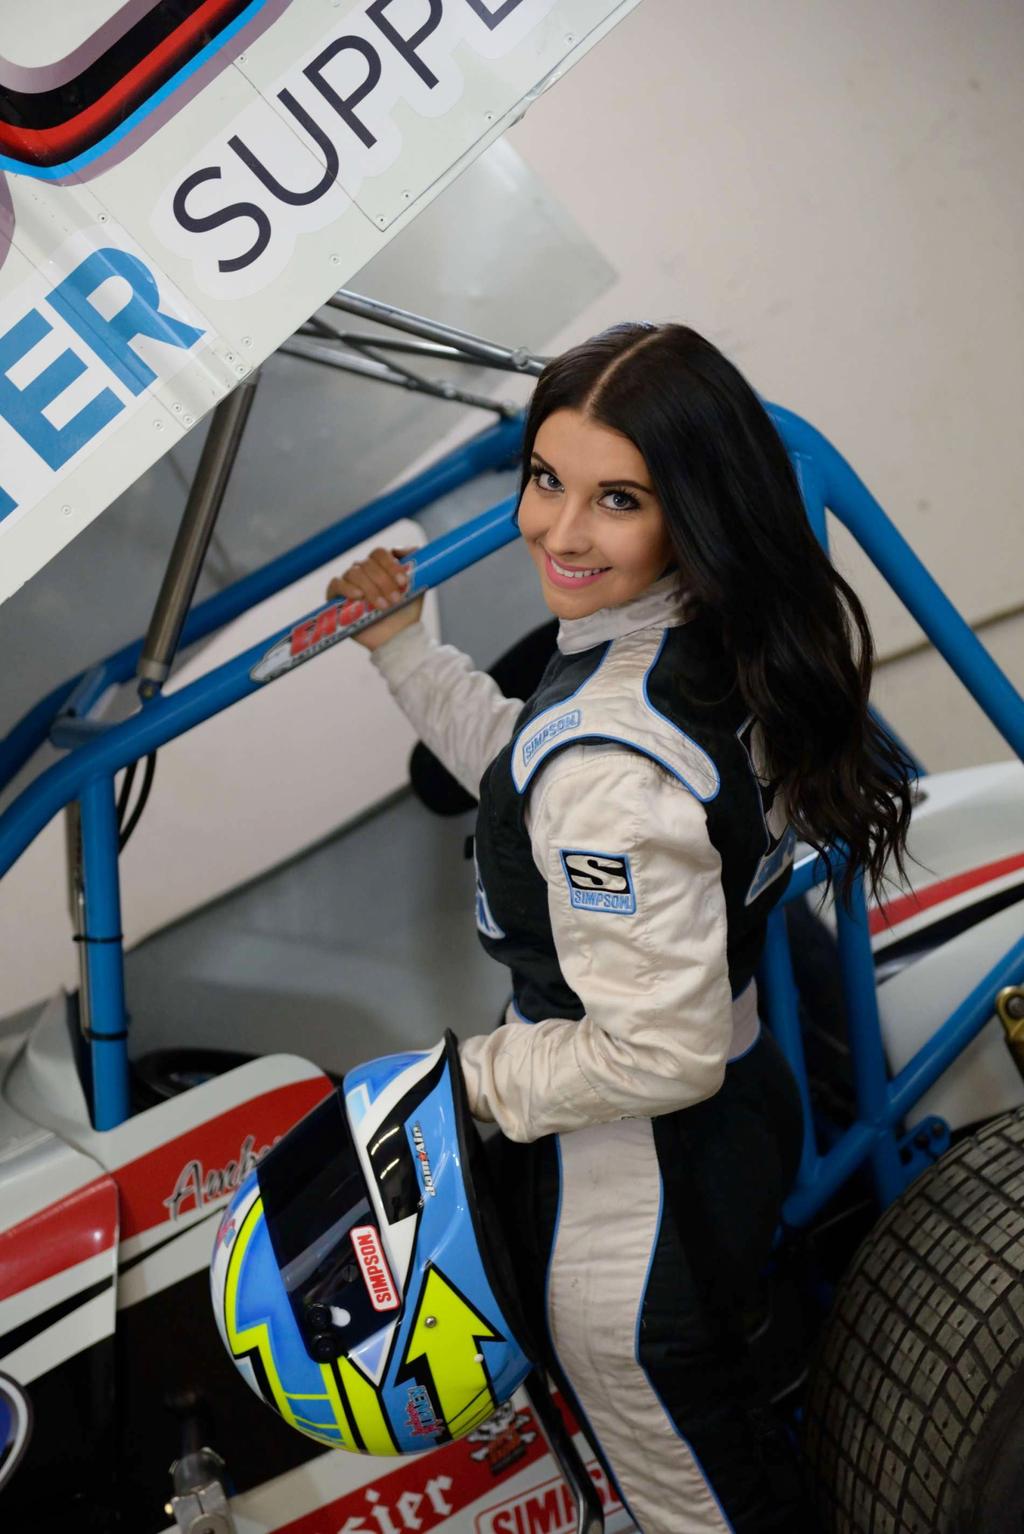 CONTACT AMBER Contact me to discuss how Amber Balcaen Racing can benefit your business.